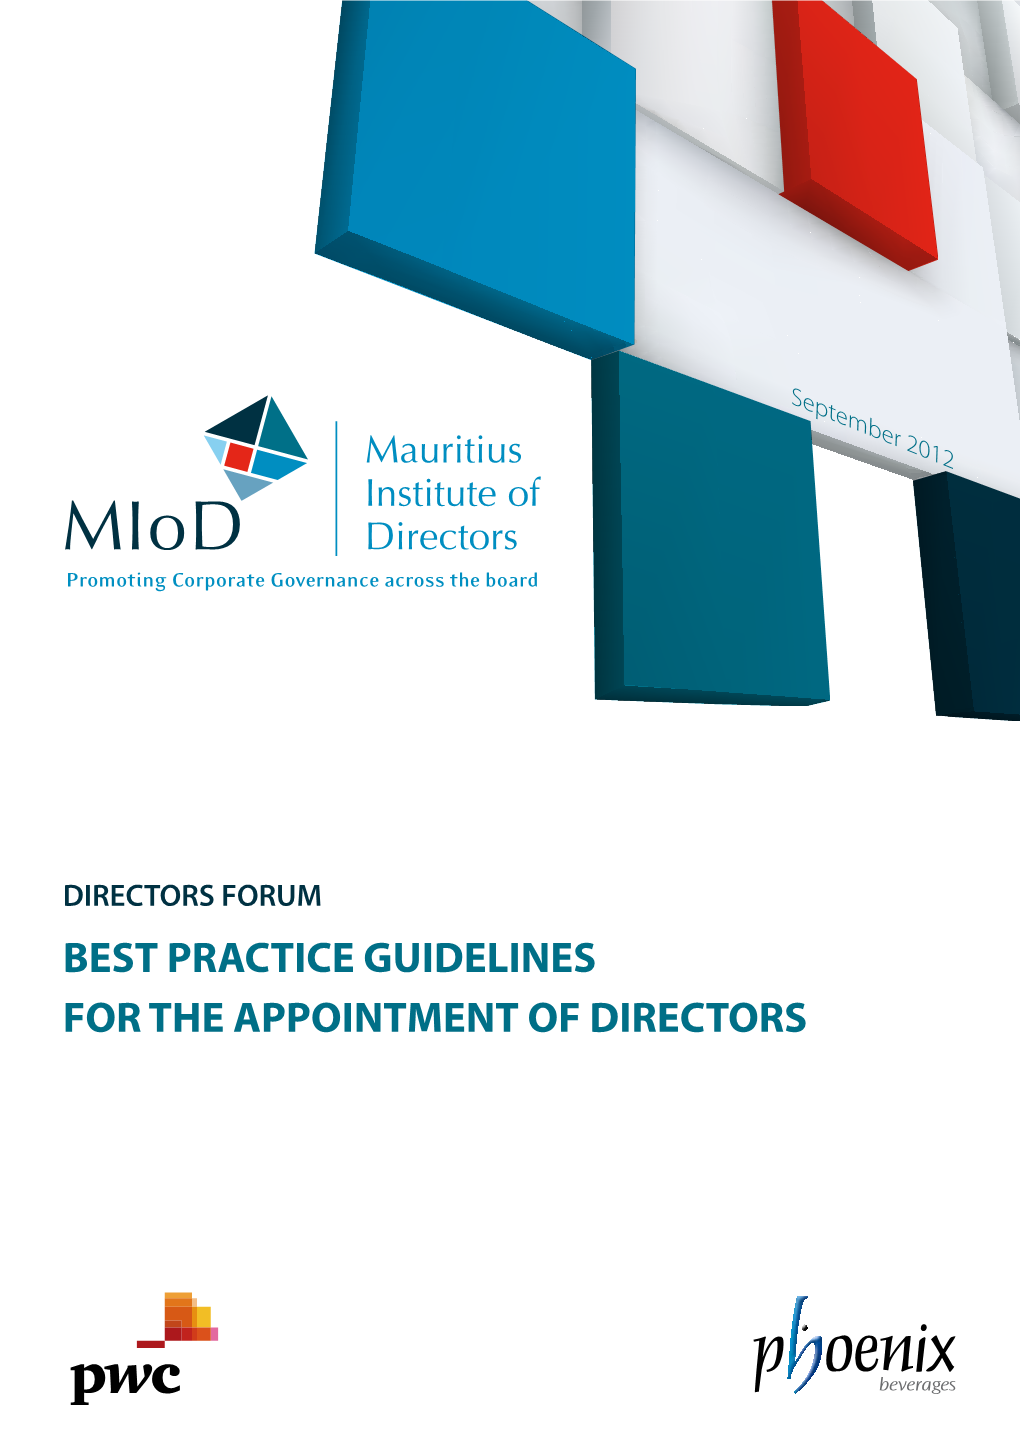 Miod Best Practice Guidelines for the Appointment of Directors